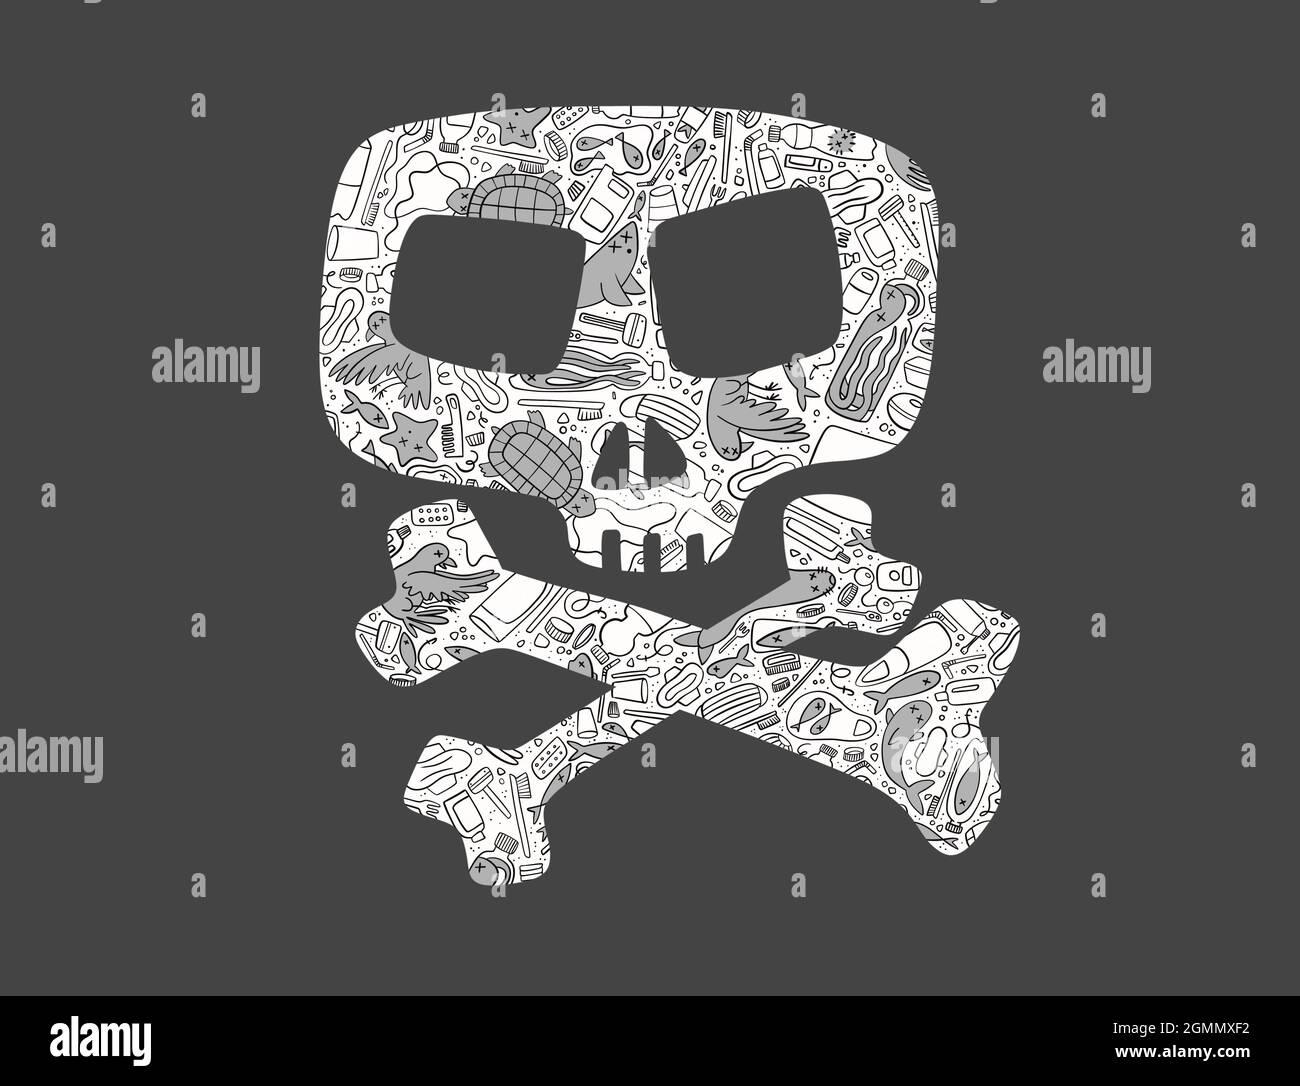 Skull with crossed bones as a symbol for plastic pollution danger for ocean animals. Stock Photo